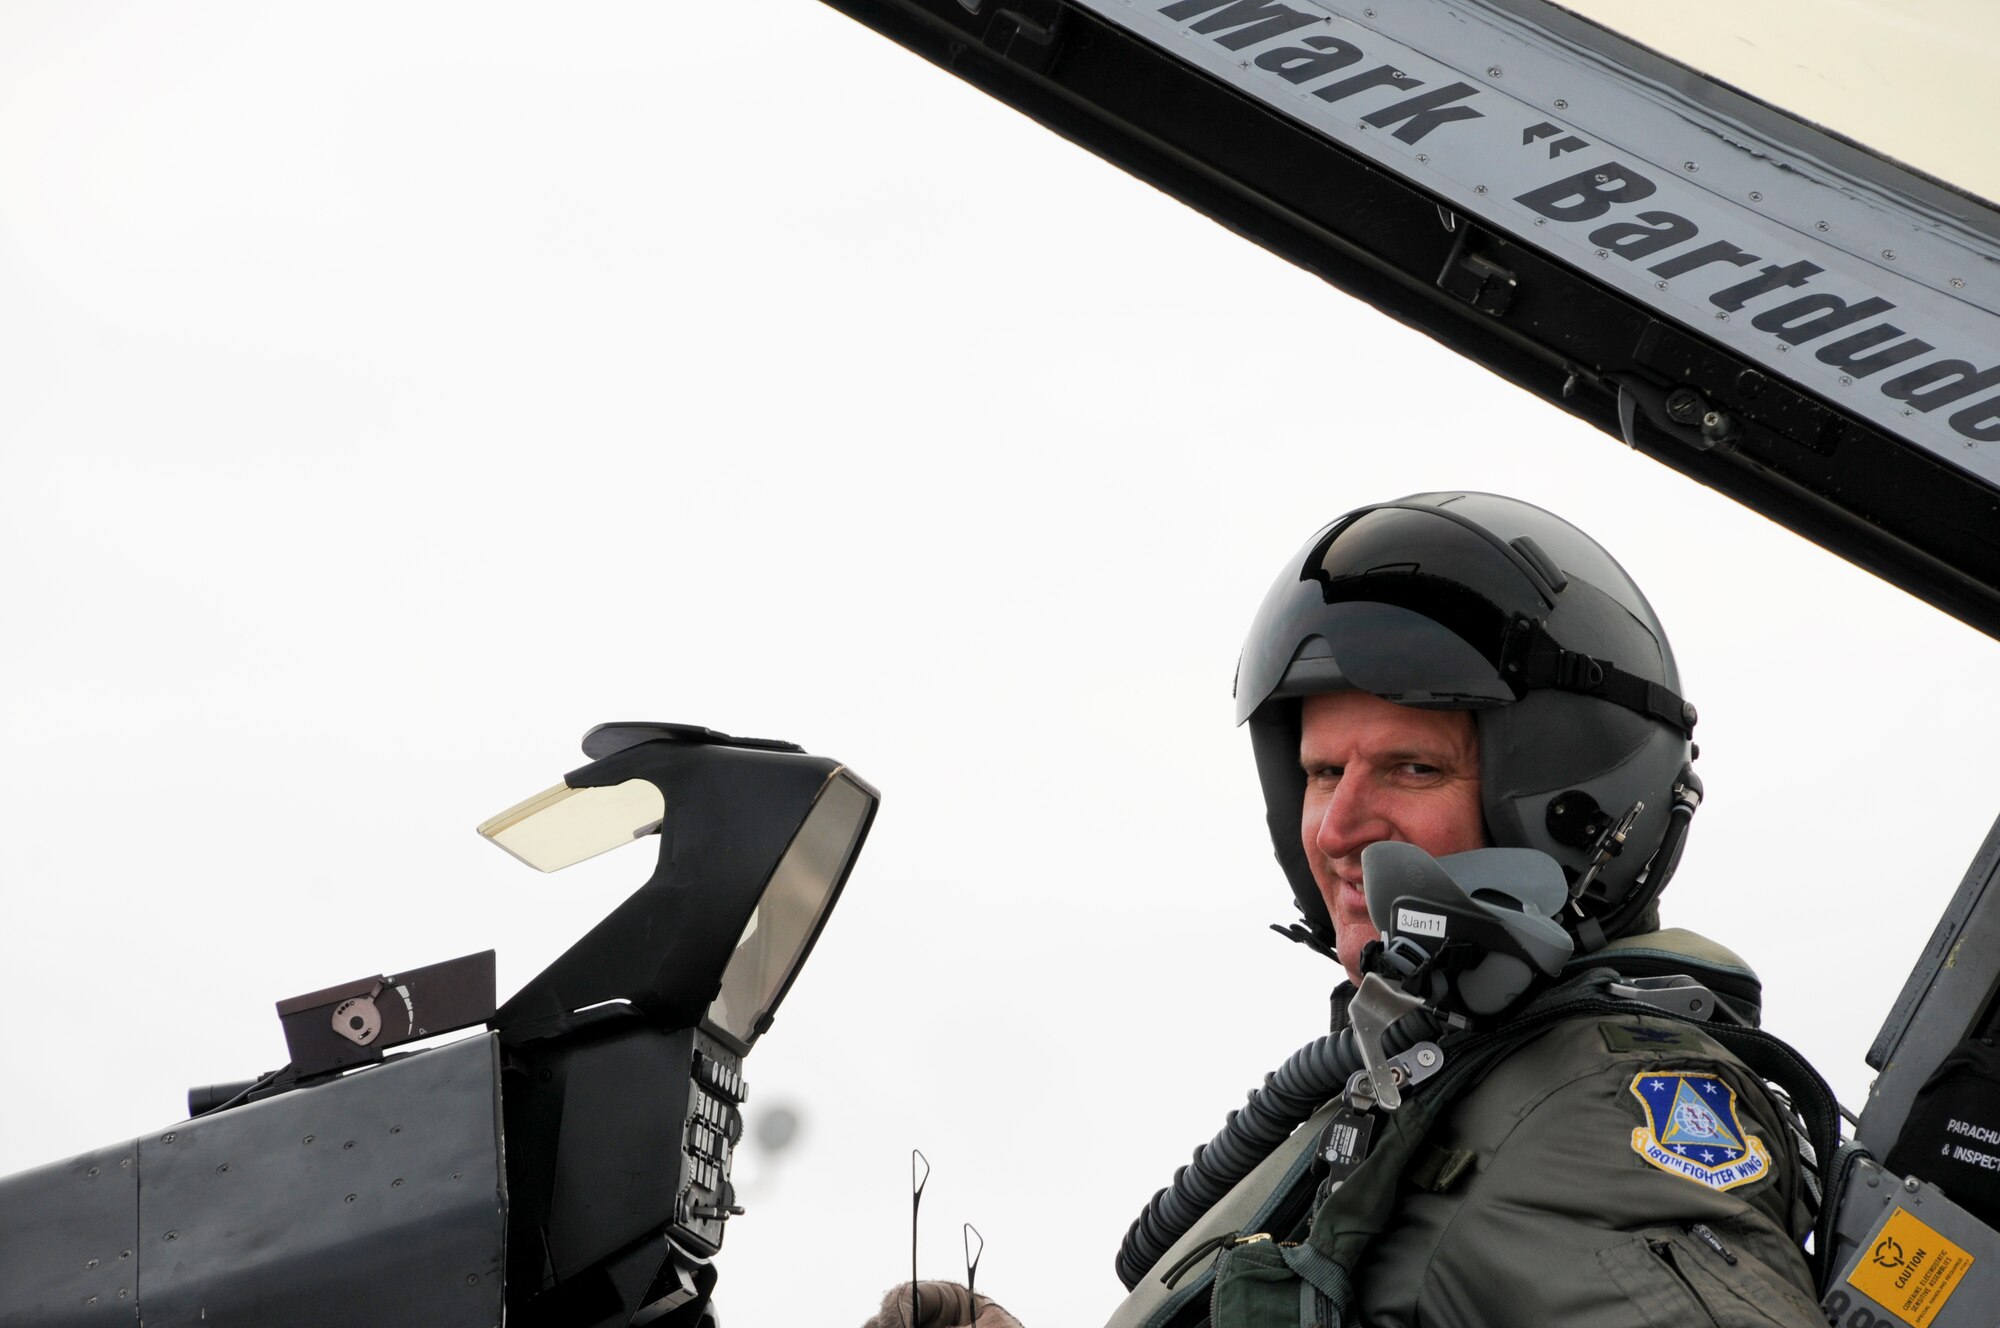 Col. Mark Bartman, 180th Fighter Wing commander prepares to take off on his final flight in the F-16 CG and as the commander of the 180th Fighter Wing Dec. 22. Bartman is leaving the 180th and will become the Assistant Adjutant General for Air for the Ohio National Guard.